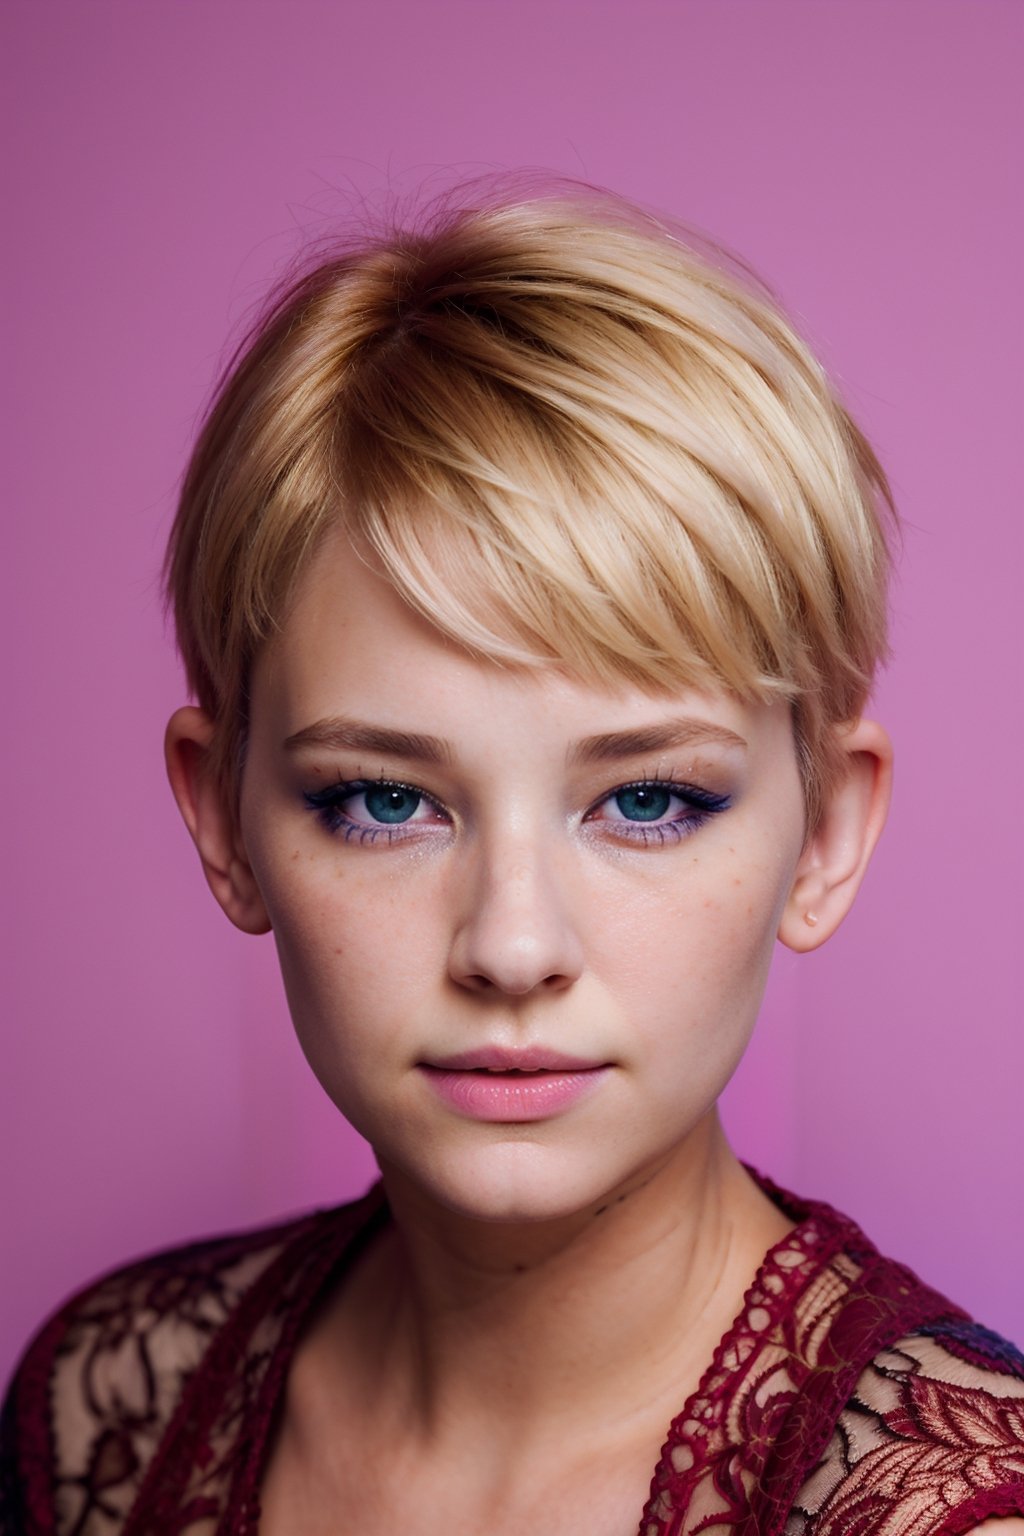 a portrait of the wo_haleyben01,  headshot_portrait,  blonde short pixie hair,  wearing a lace red shirt,  colorful background,  global illumination,  high details,  UHD,  RAW,  HDR effect,  beautiful,  aesthetic,  perfect lighting,  thin nose,  woman, deep blue eyes